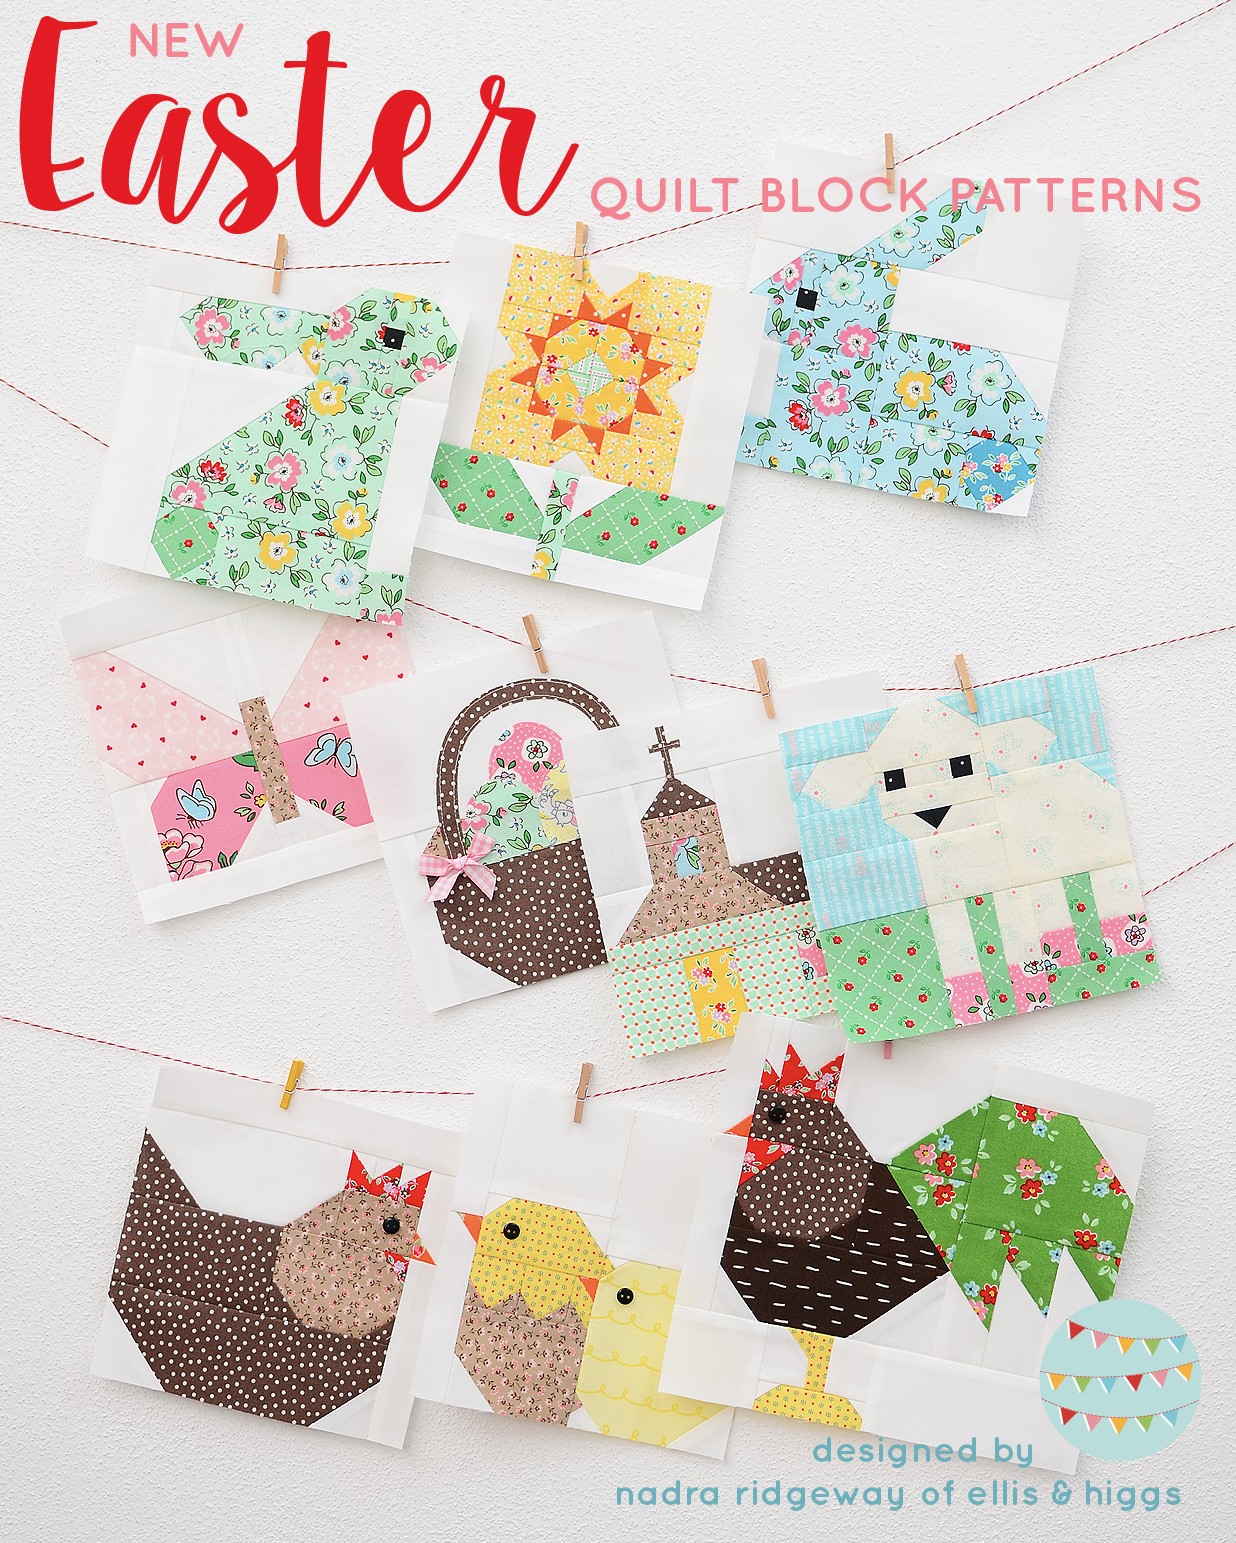 Ten Easter quilt blocks hanging on the wall.